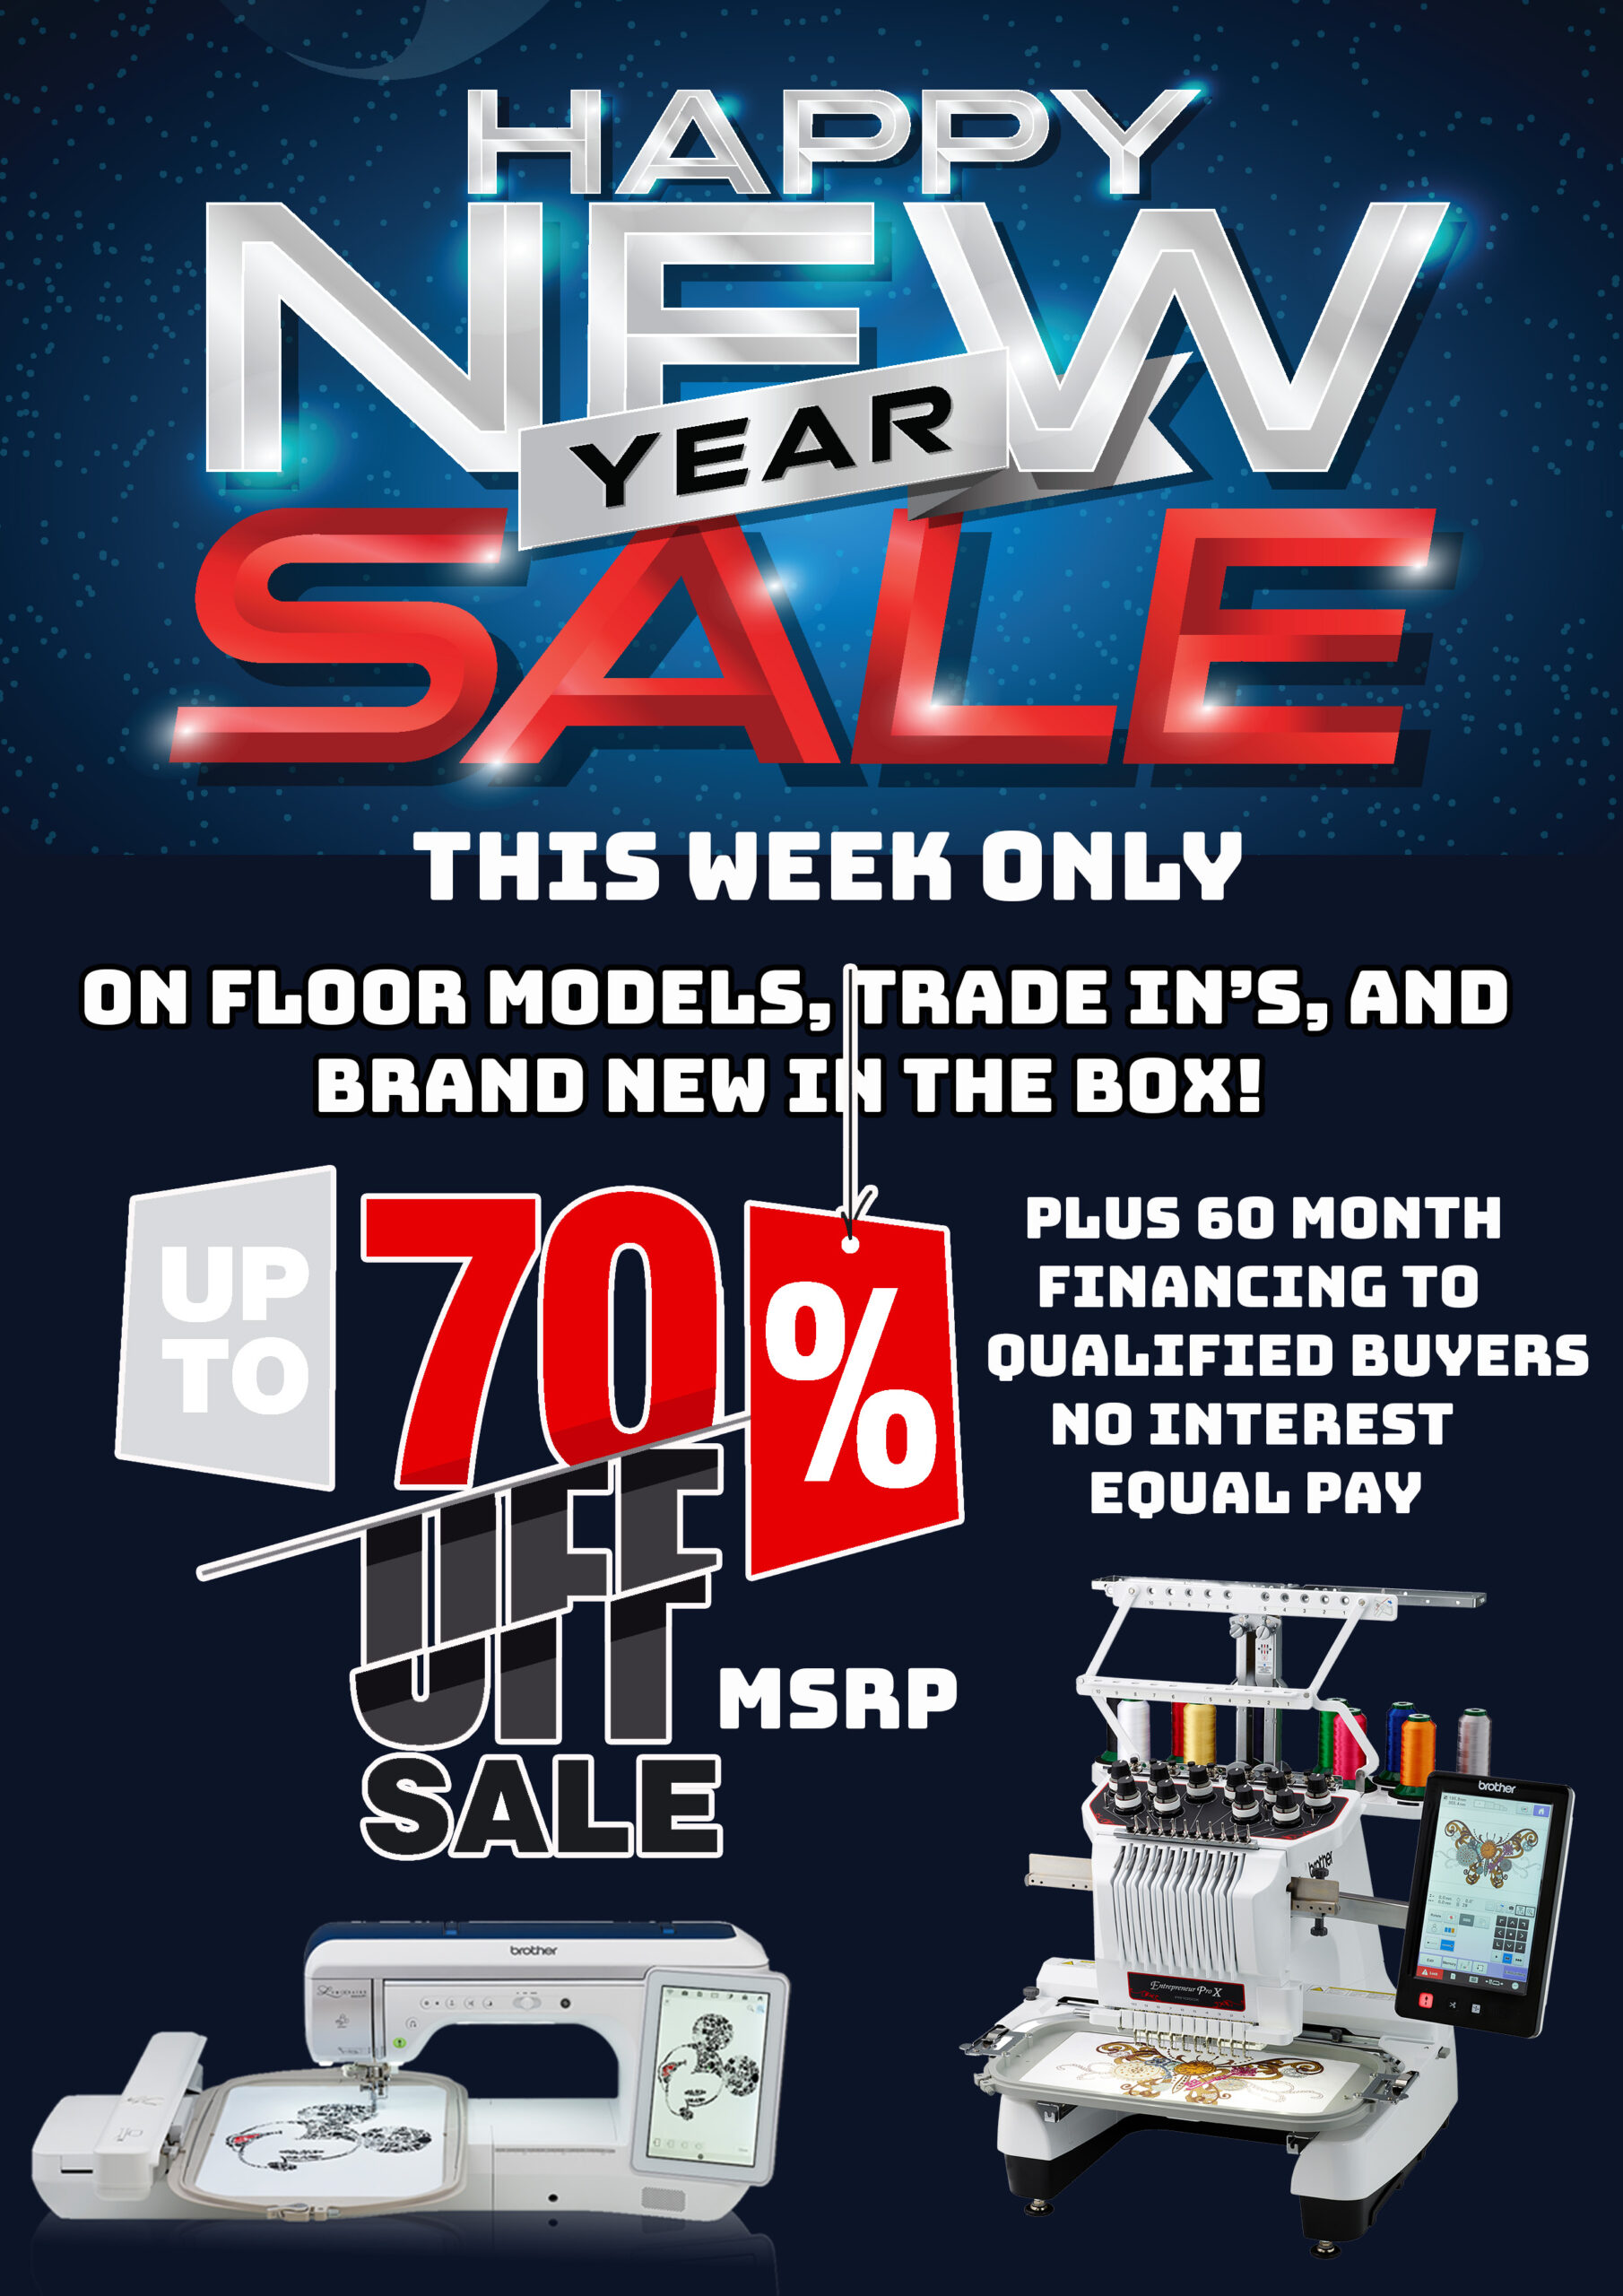 brother new year sale